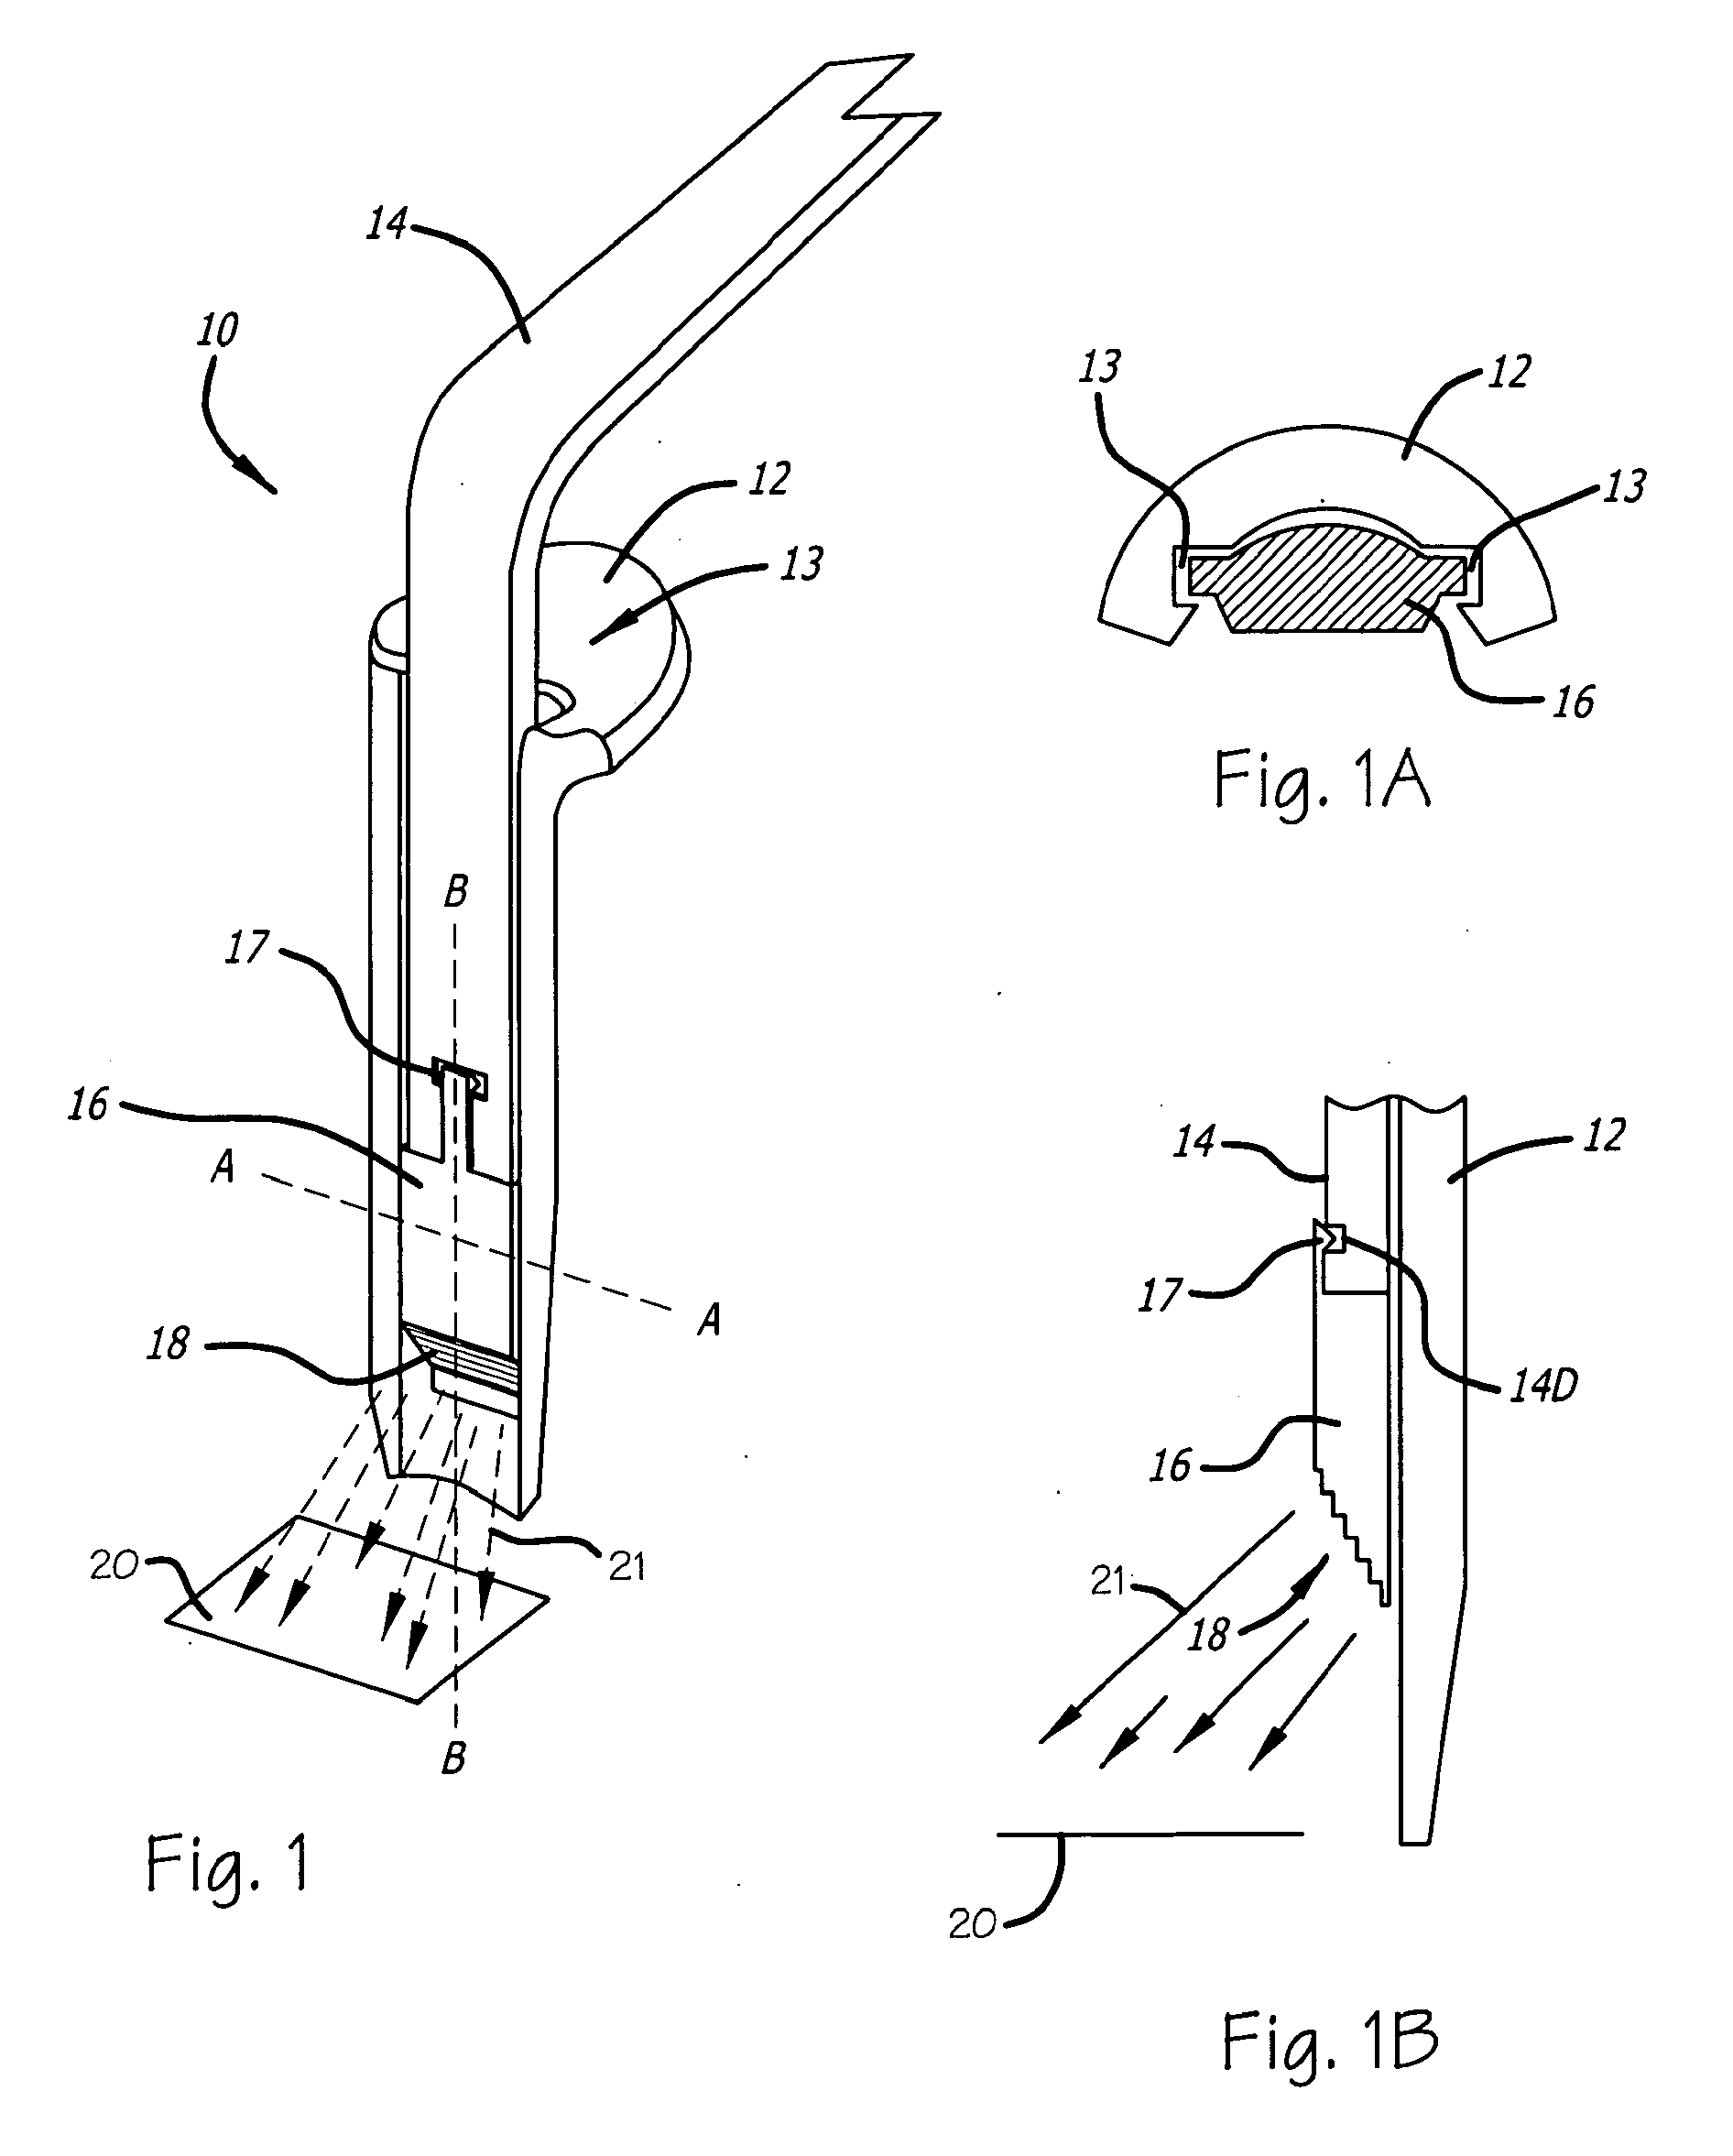 Cyclo olefin polymer and copolymer medical devices